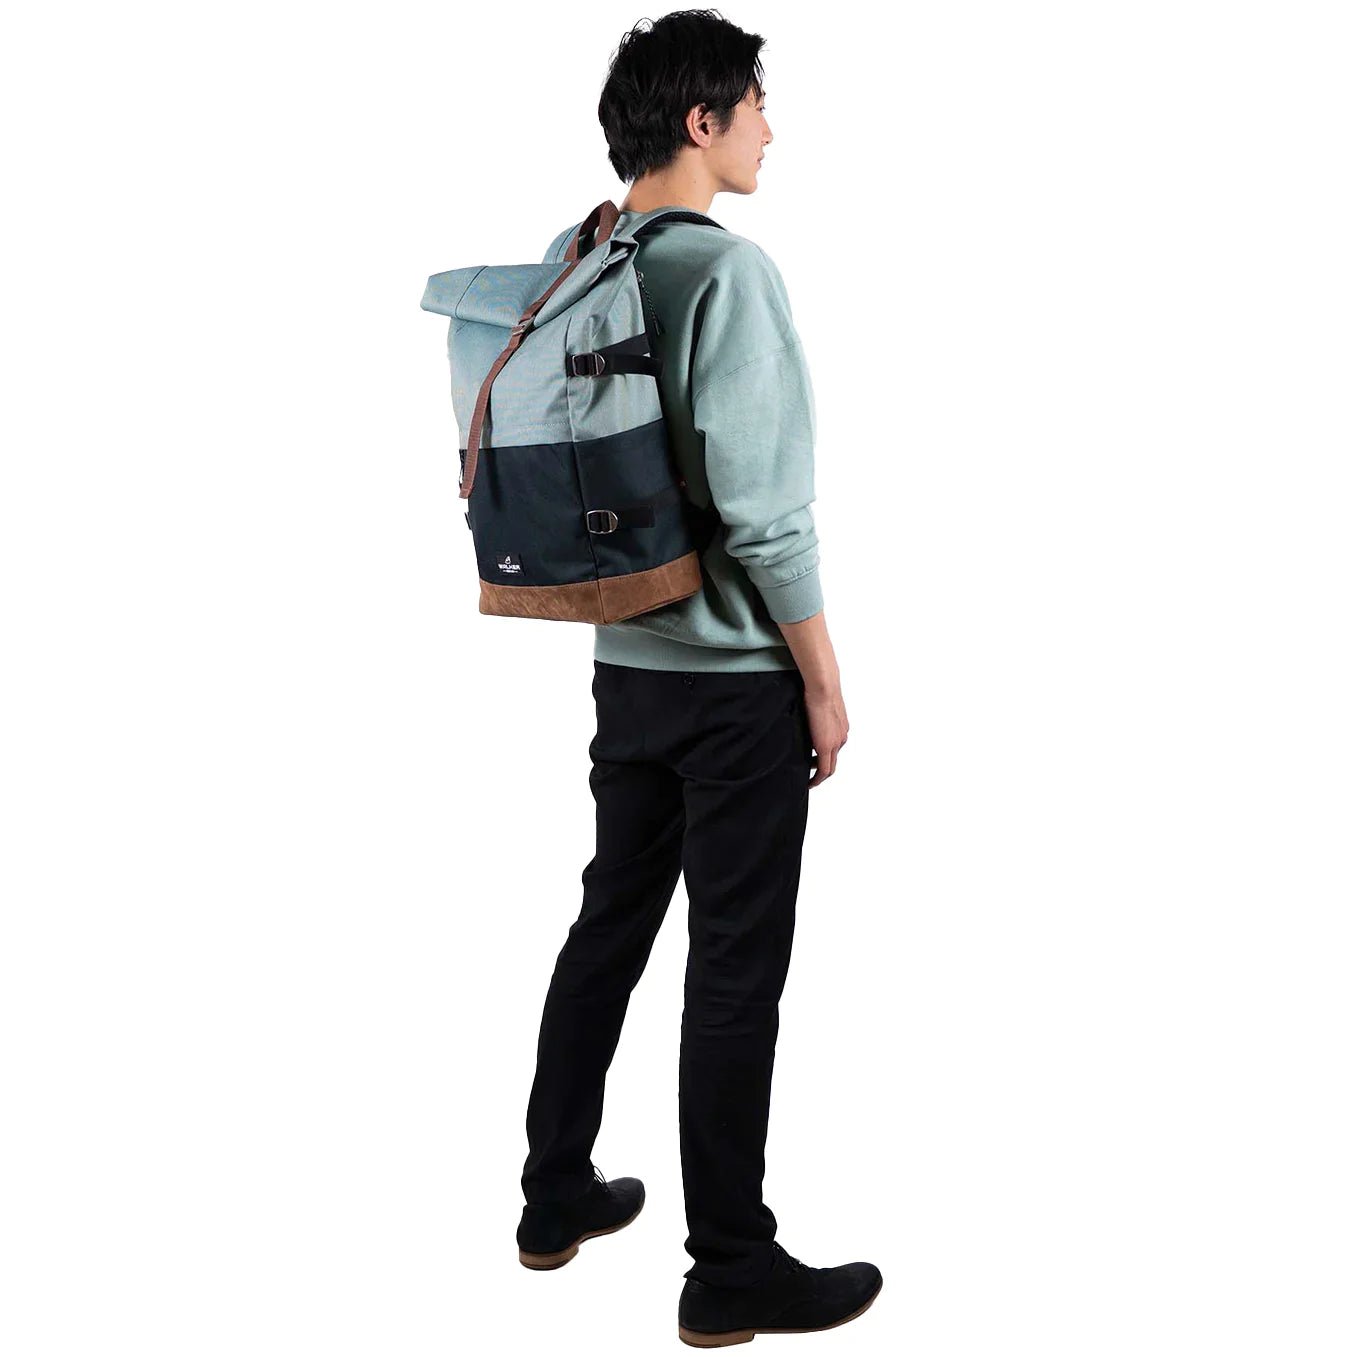 Walker Bags Roll Up Two Rucksack 45 cm - Light Grey/Anthracite